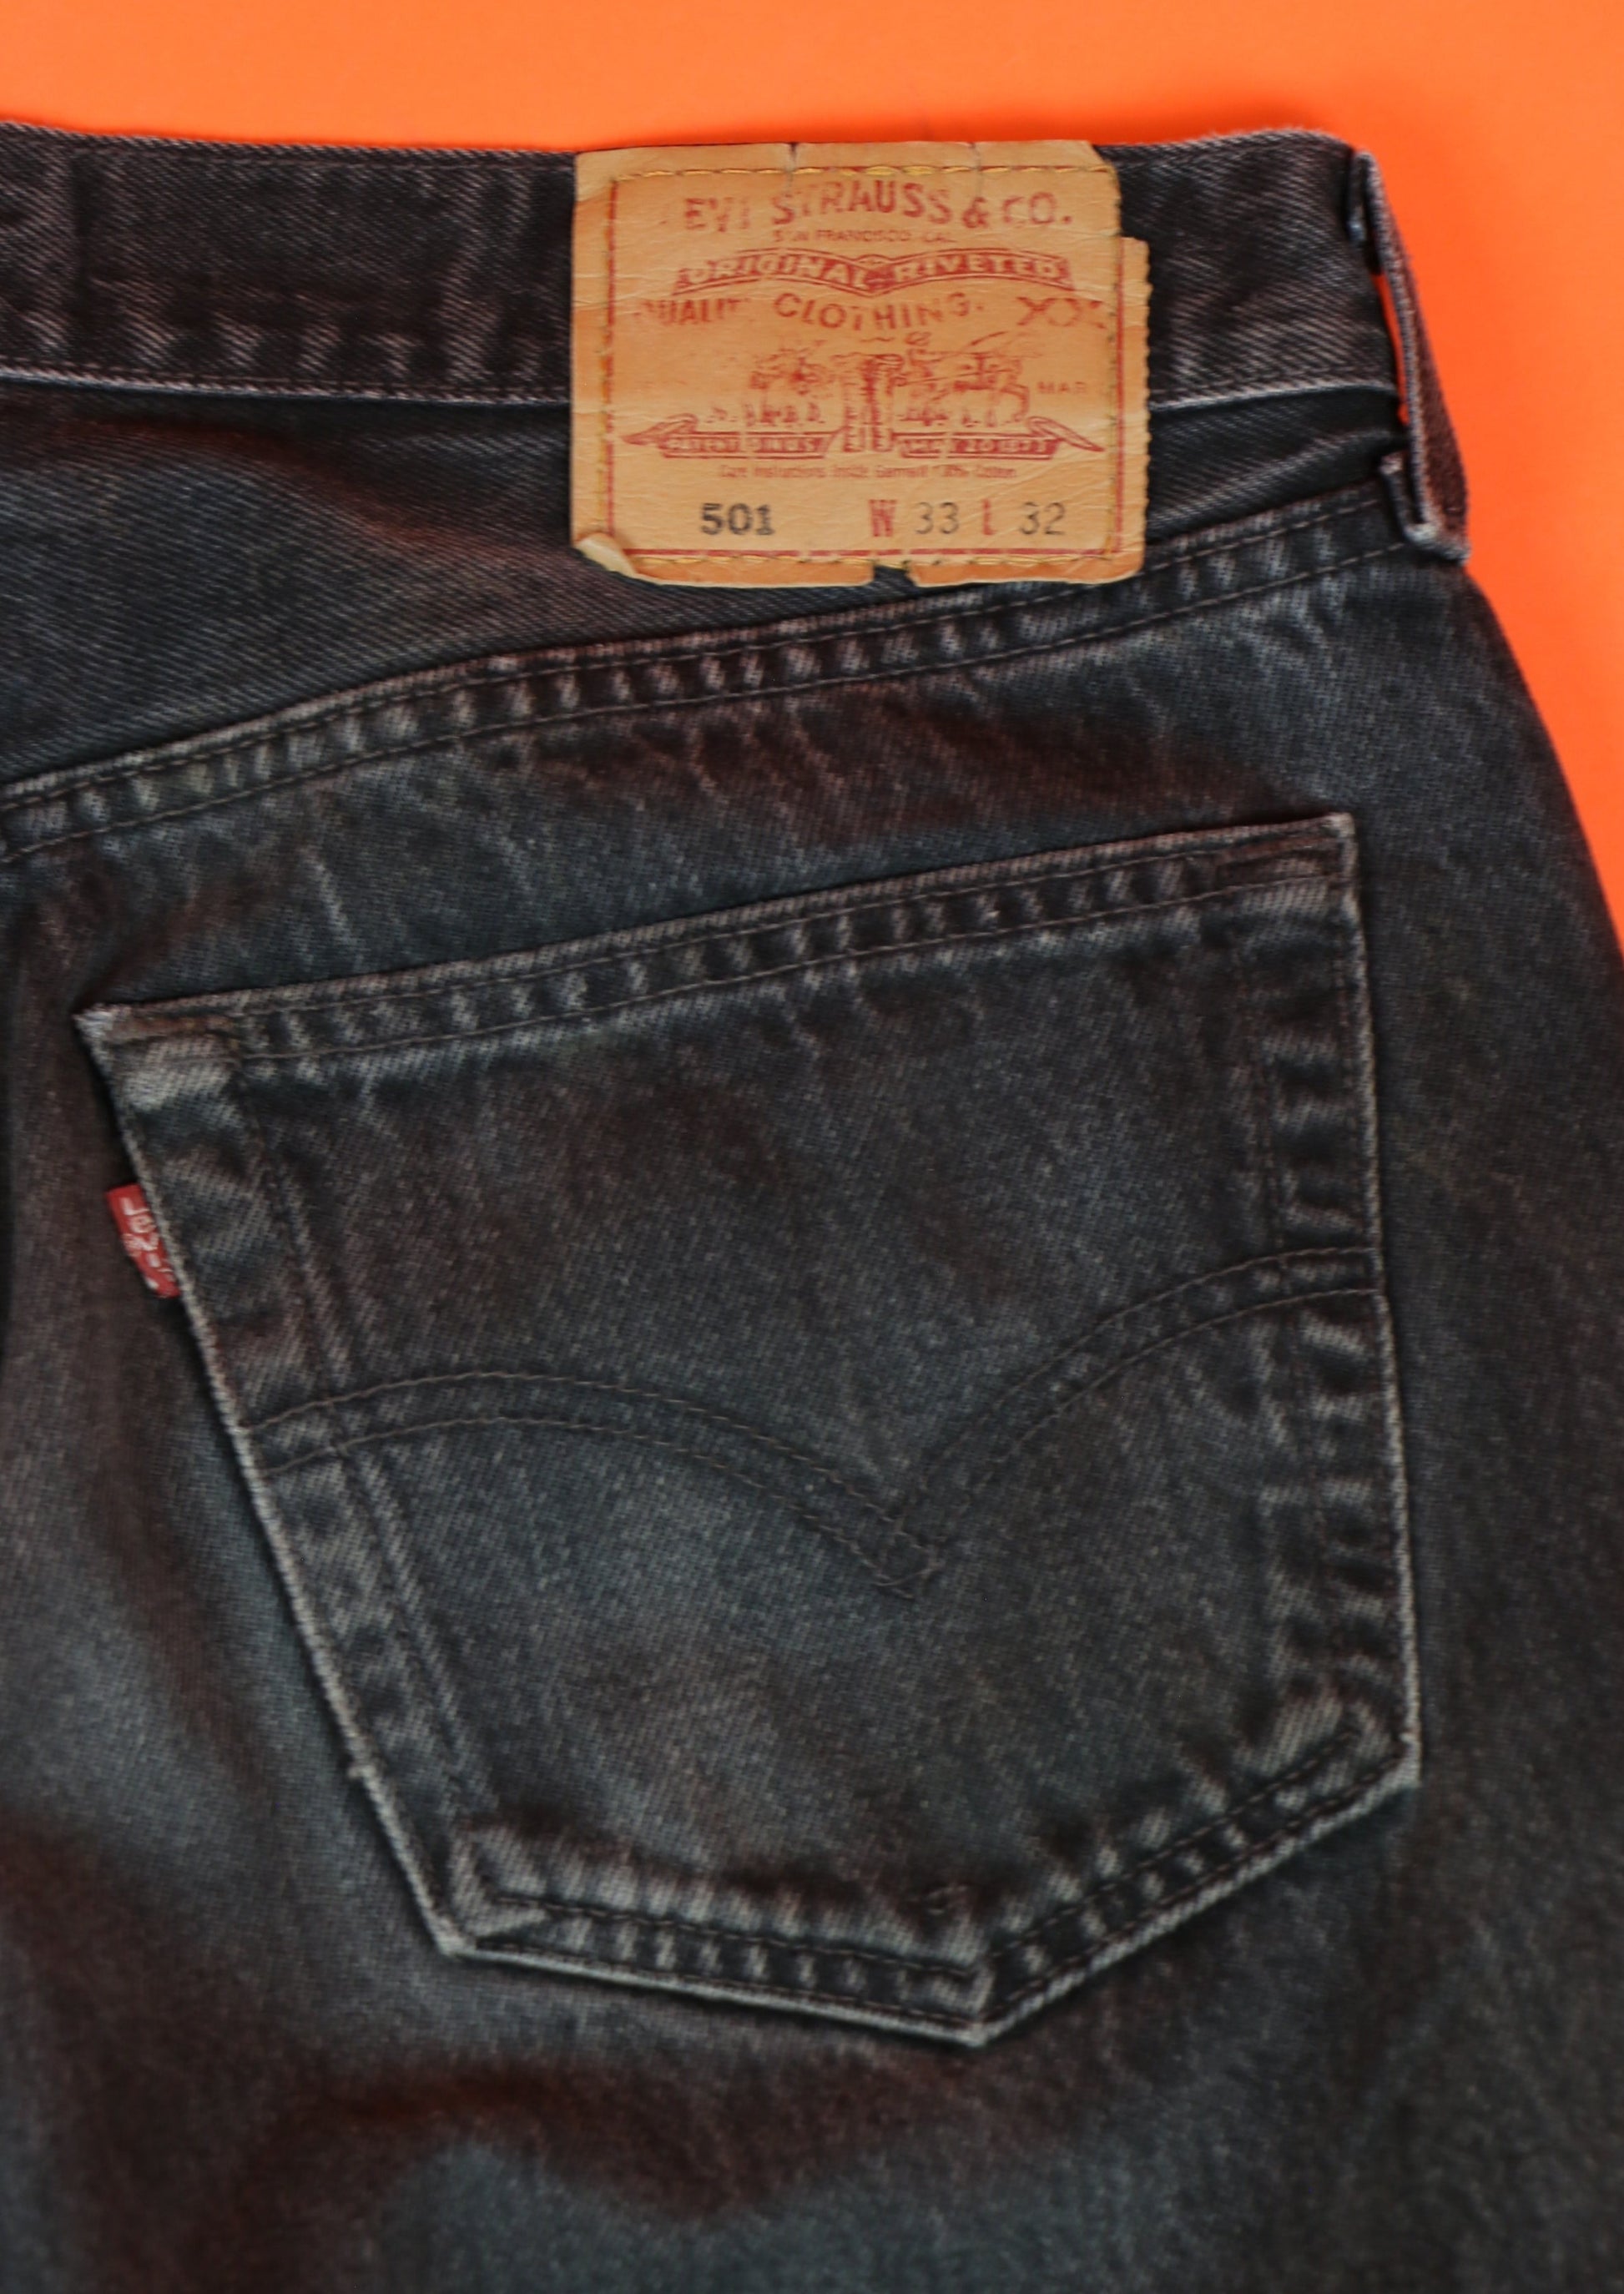 Levi's 501 Made in U.S.A. Jeans W33 L32 - vintage clothing clochard92.com